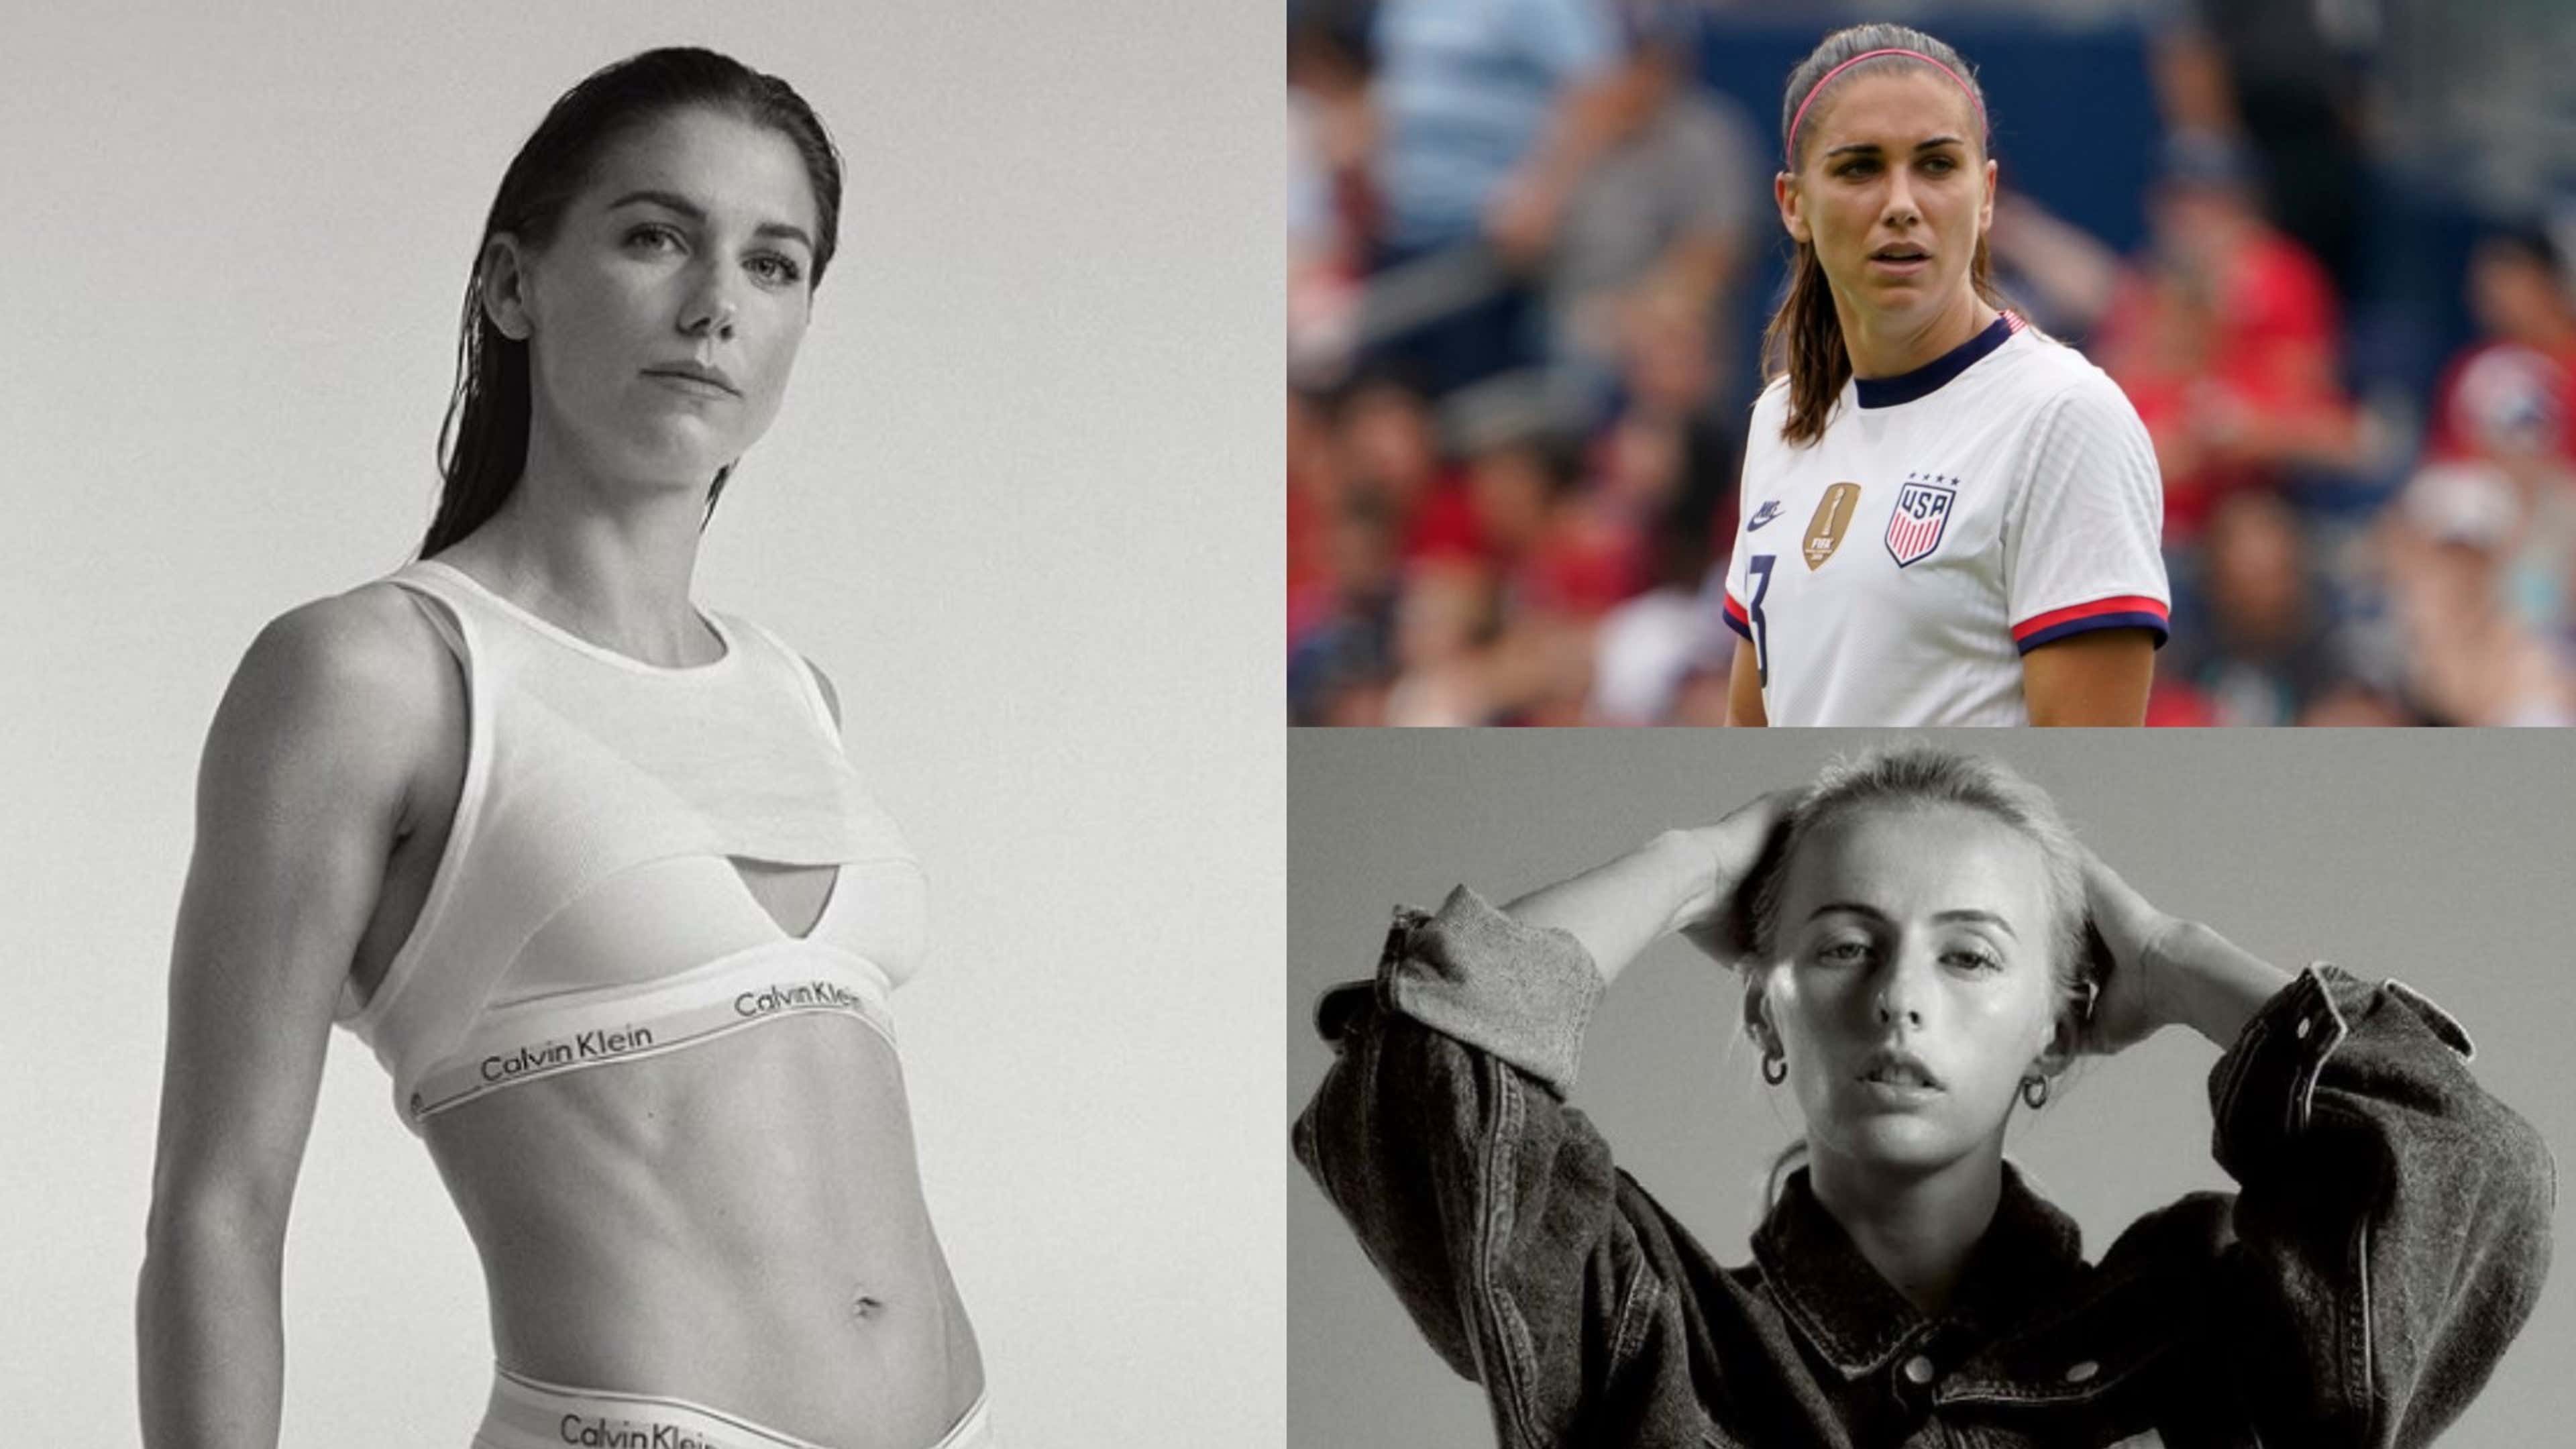 What is the 'sports bra' style clothing footballers are seen